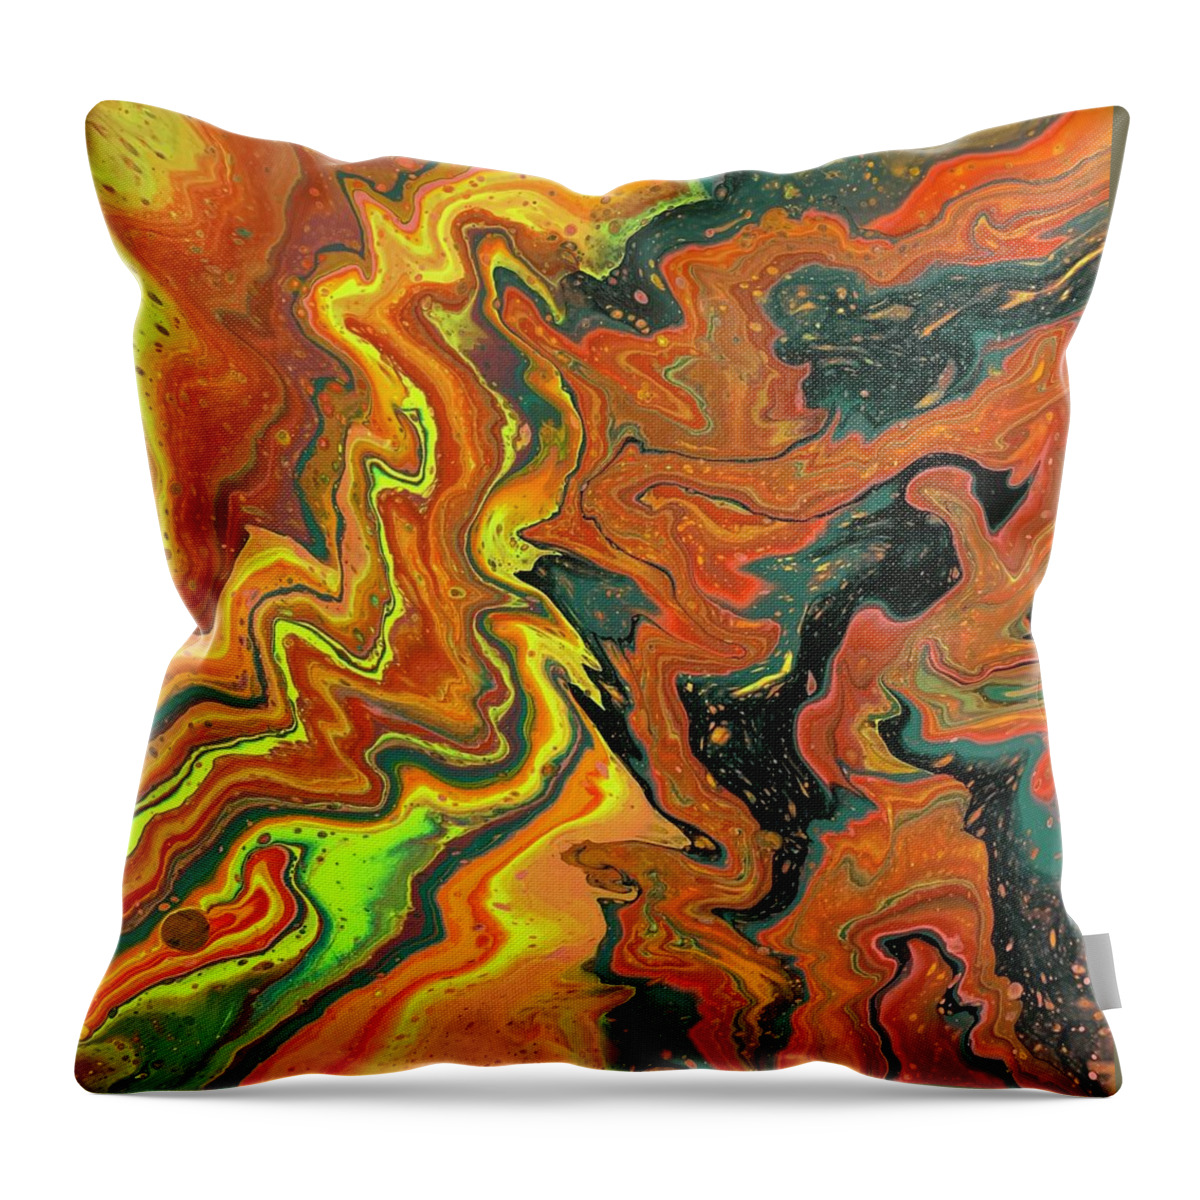 Trippy Throw Pillow featuring the painting Hybrid by Nicole DiCicco